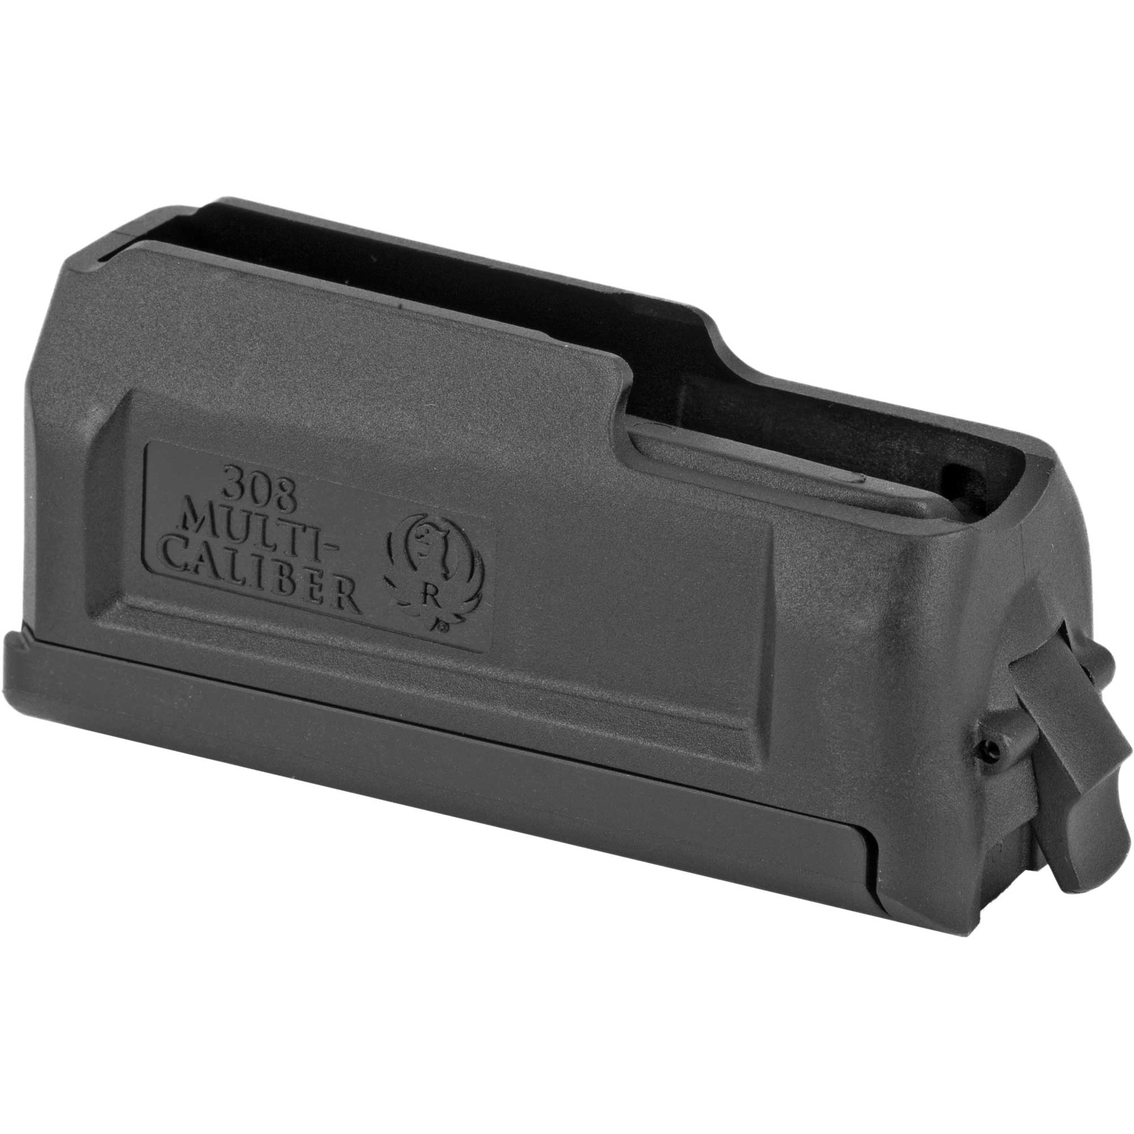 Ruger Magazine 308 Win, 243 Win and 7mm-08 Fits Ruger American SA, 4 Rounds - Image 2 of 2